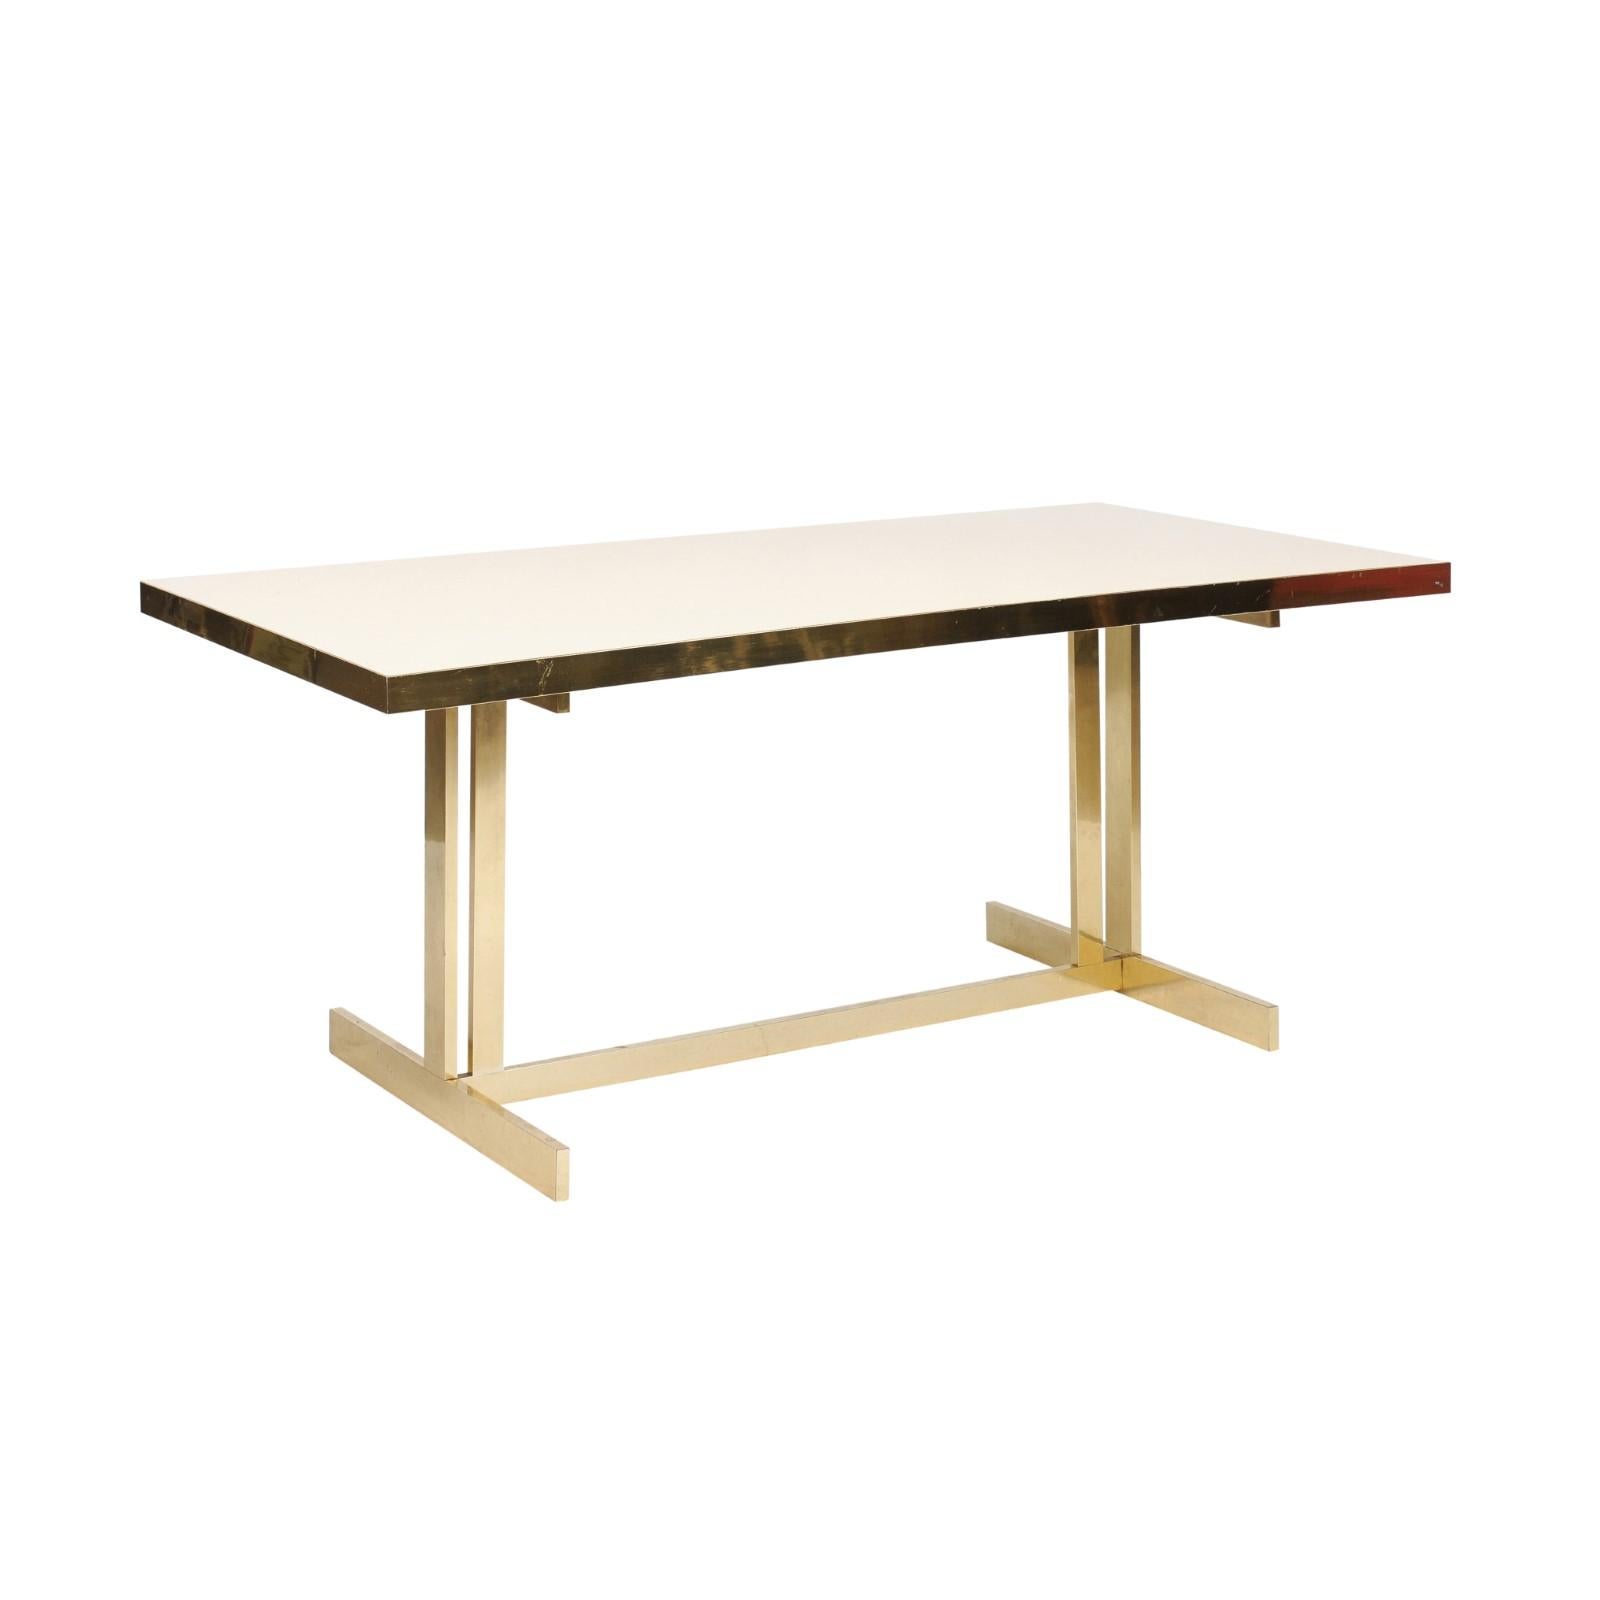 Italian Vintage Mid-Century Modern Formica Dining Table with Brass Trestle Base